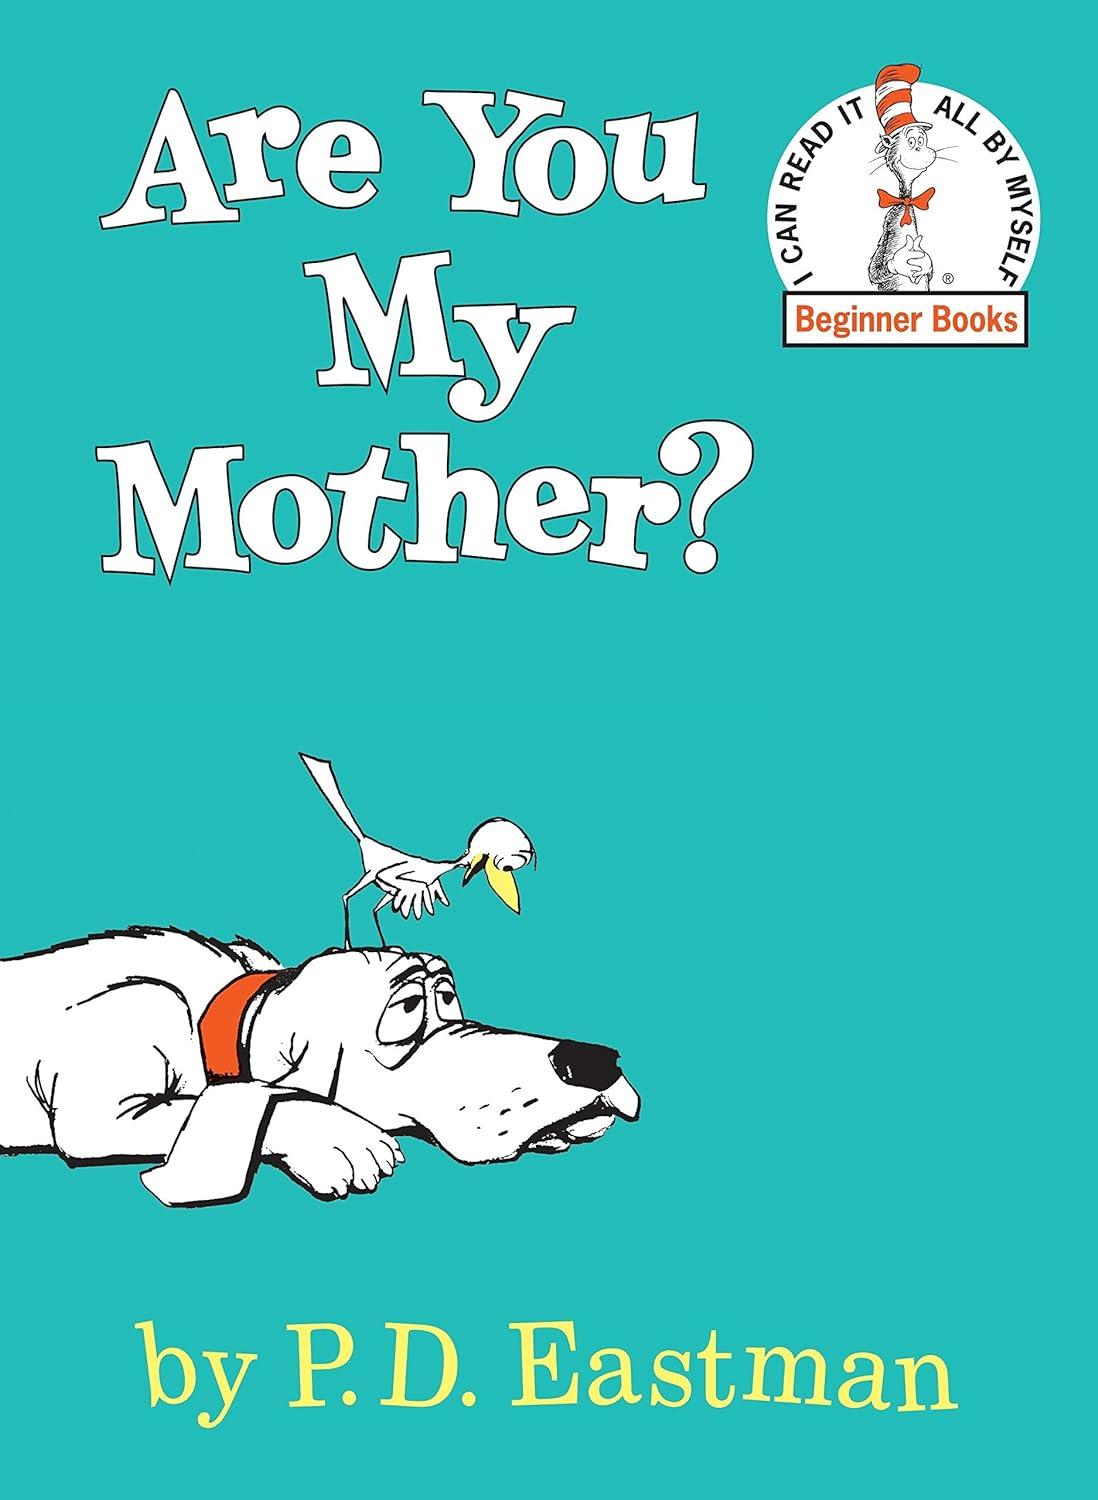 "Are You My Mother" by P.D. Eastman.